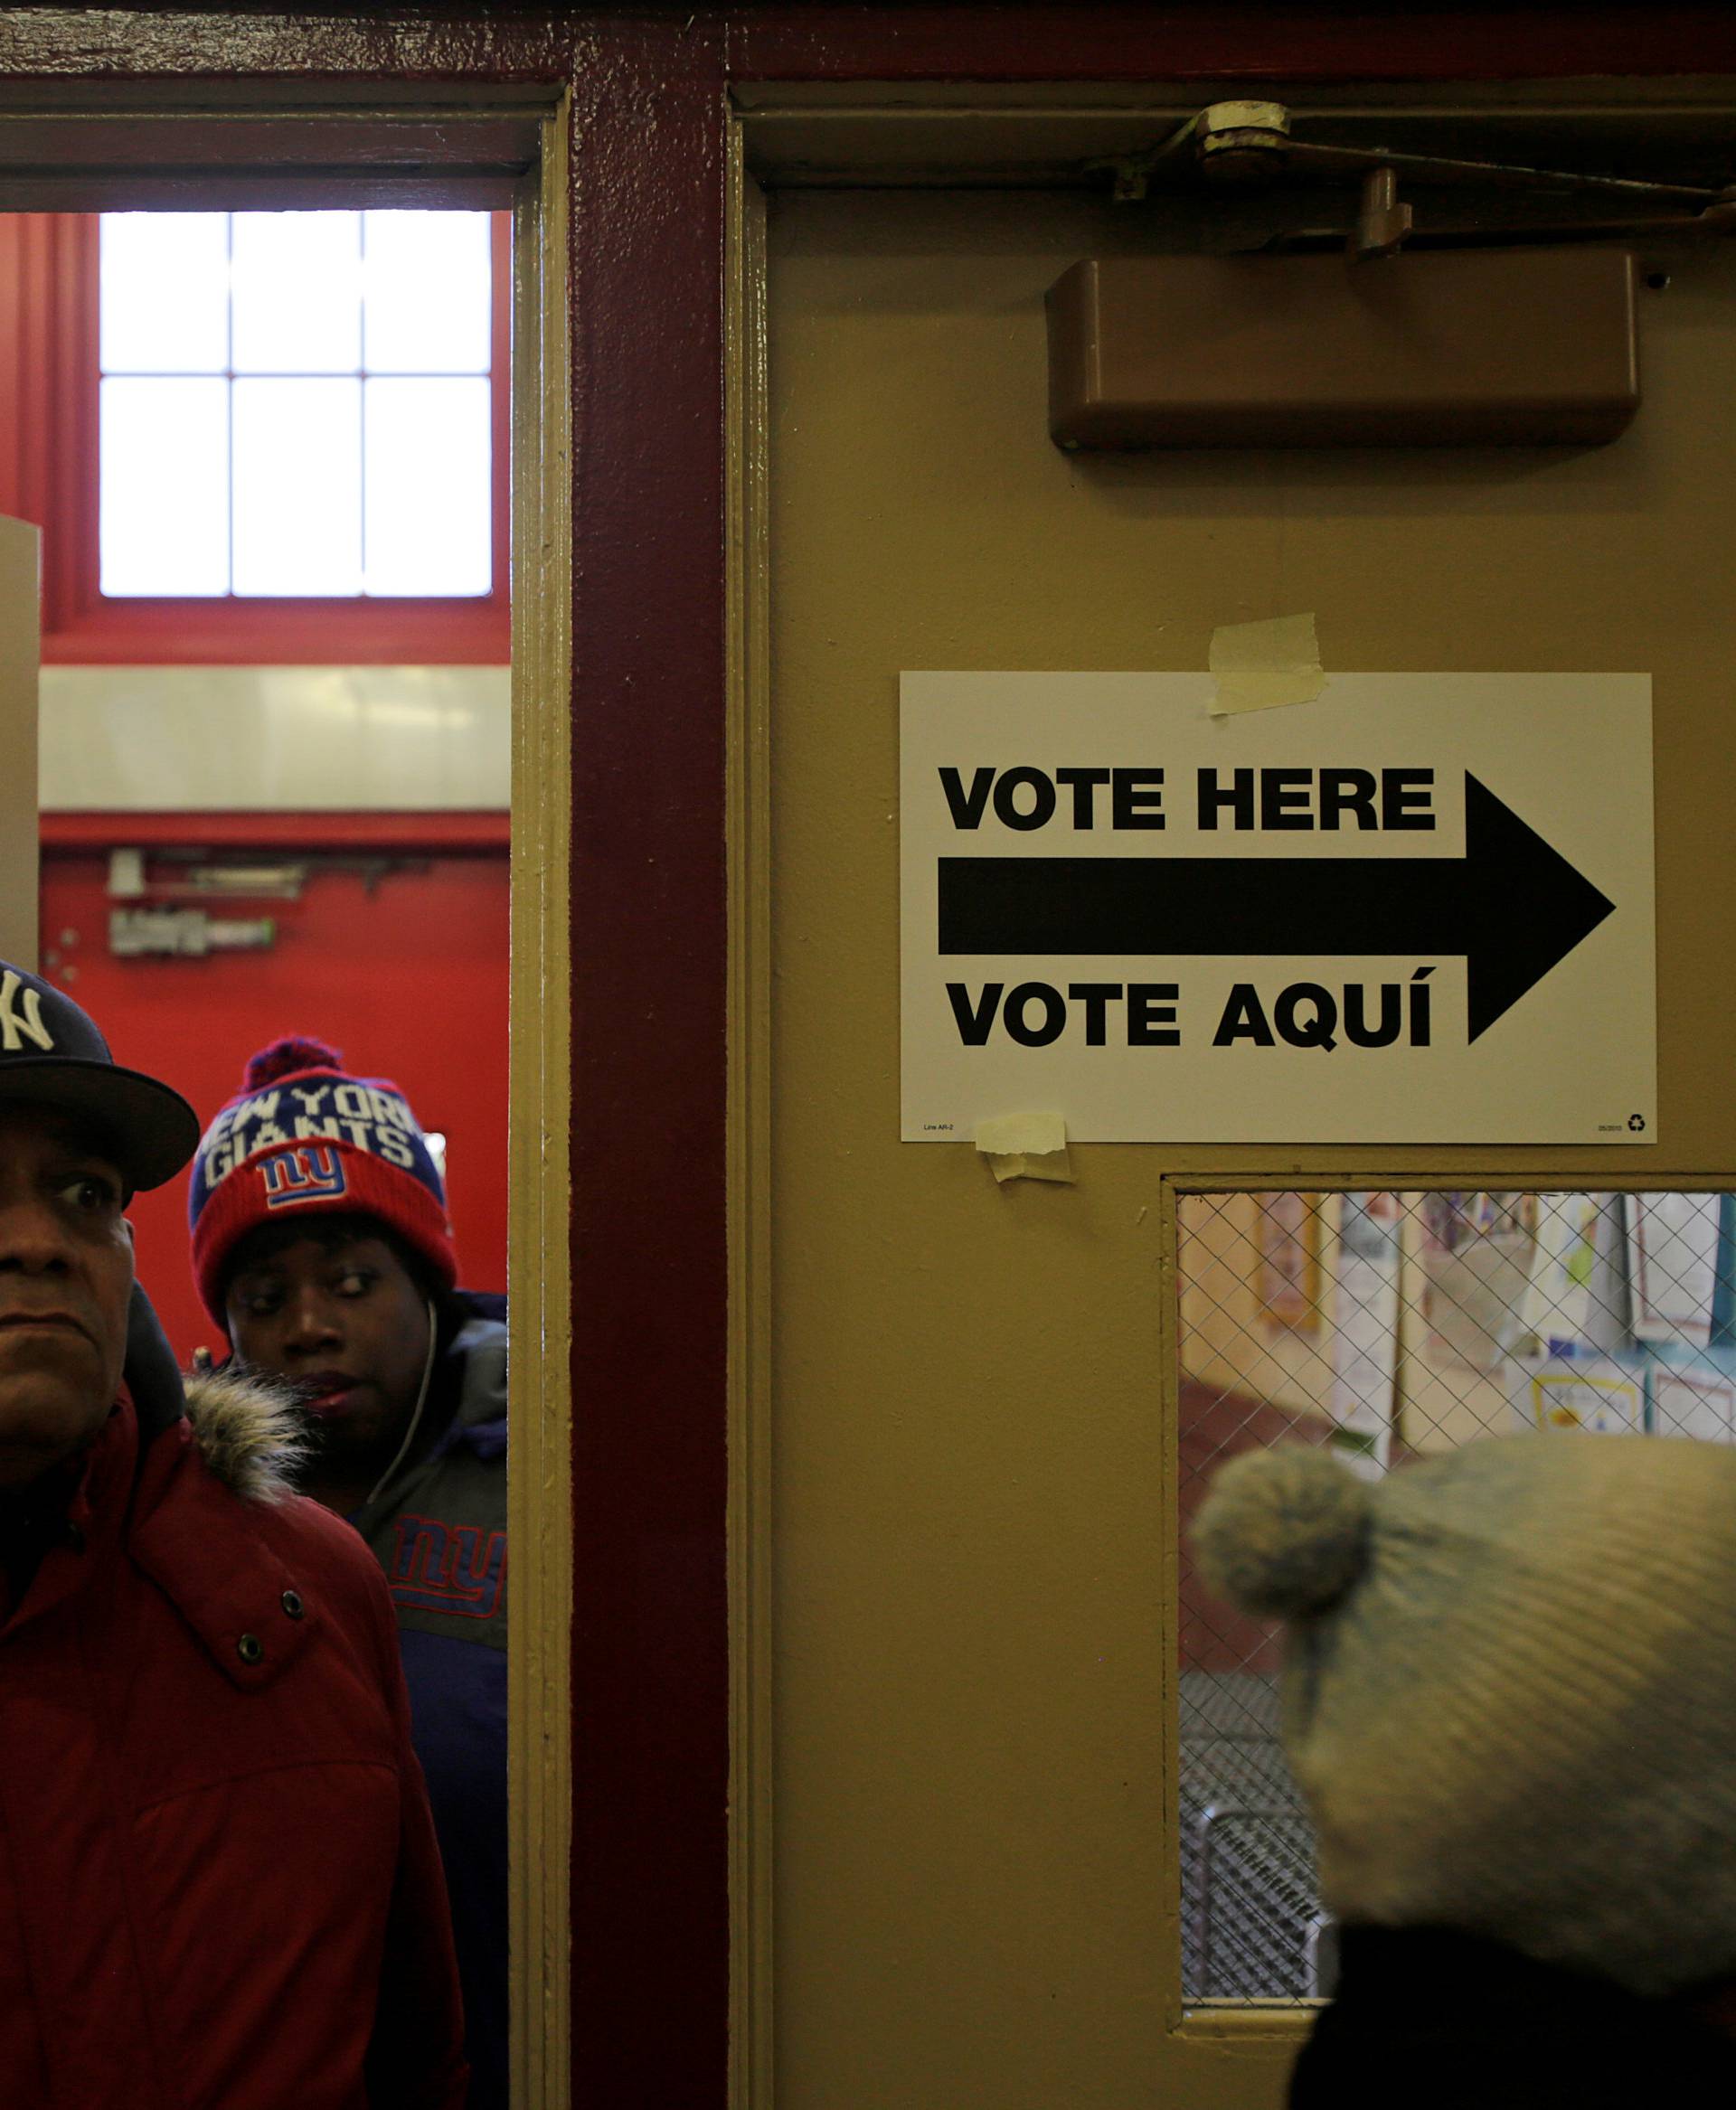 Voters arrive at a polling station to cast their votes during the U.S. presidential election at a polling station in the Bronx Borough of New York.